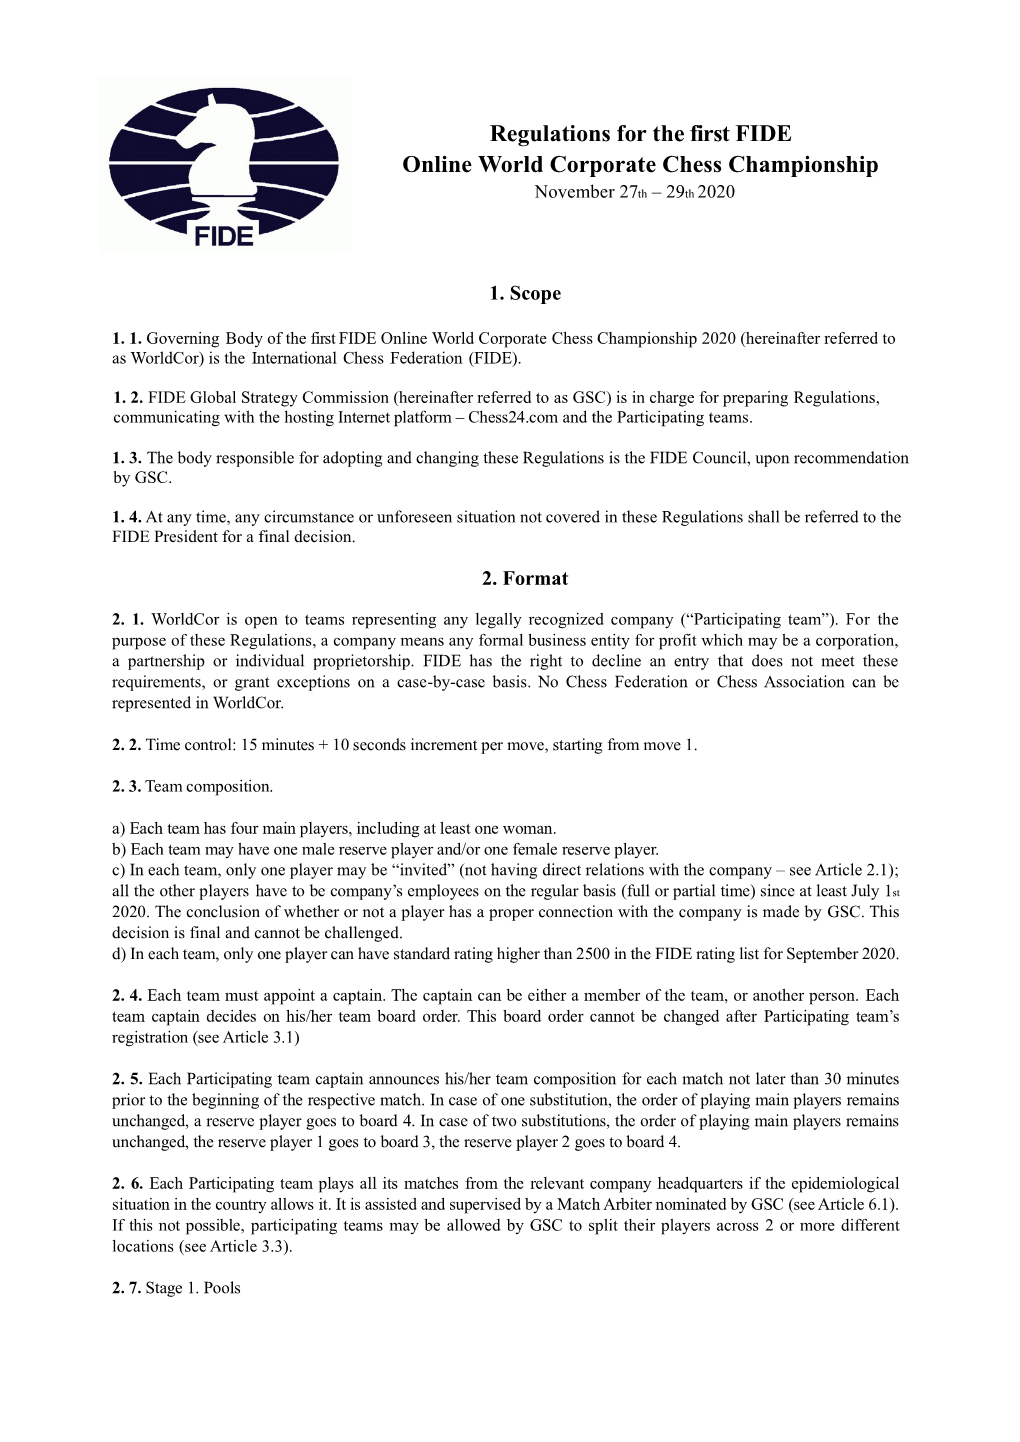 Regulations for the First FIDE Online World Corporate Chess Championship November 27Th – 29Th 2020